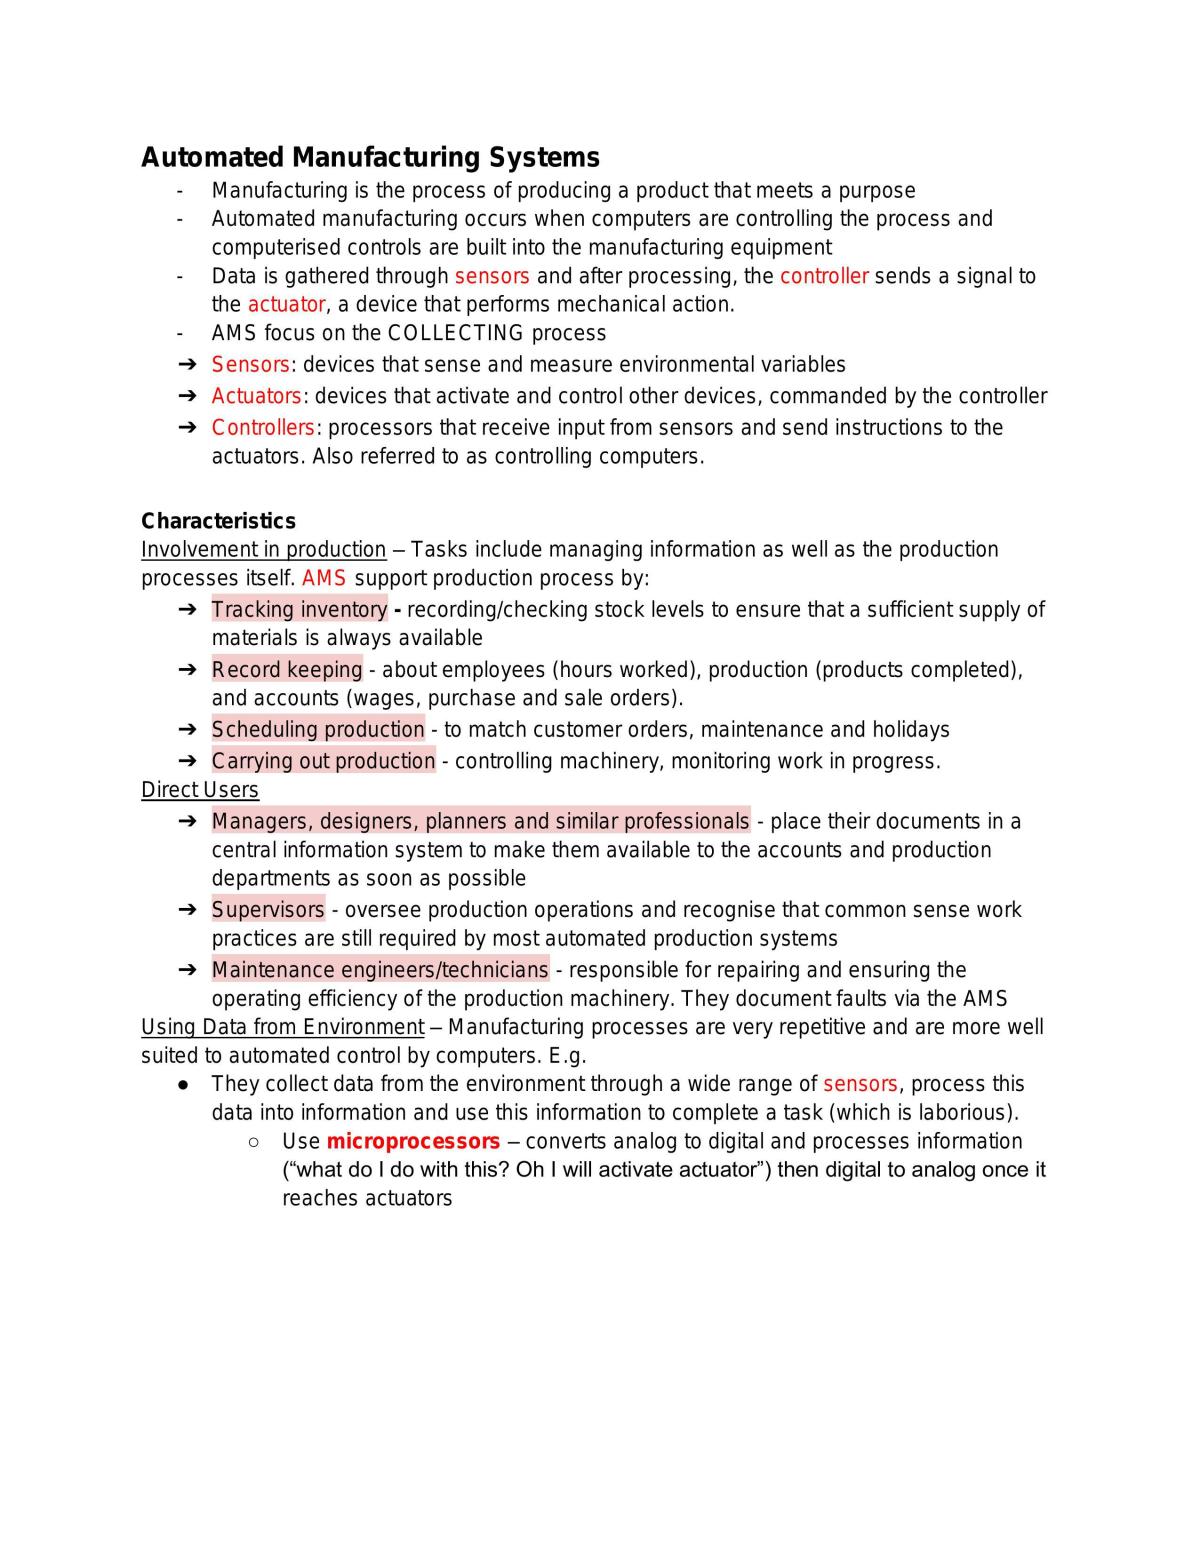 Automated Manufacturing System Notes [Full Topic] - Page 1